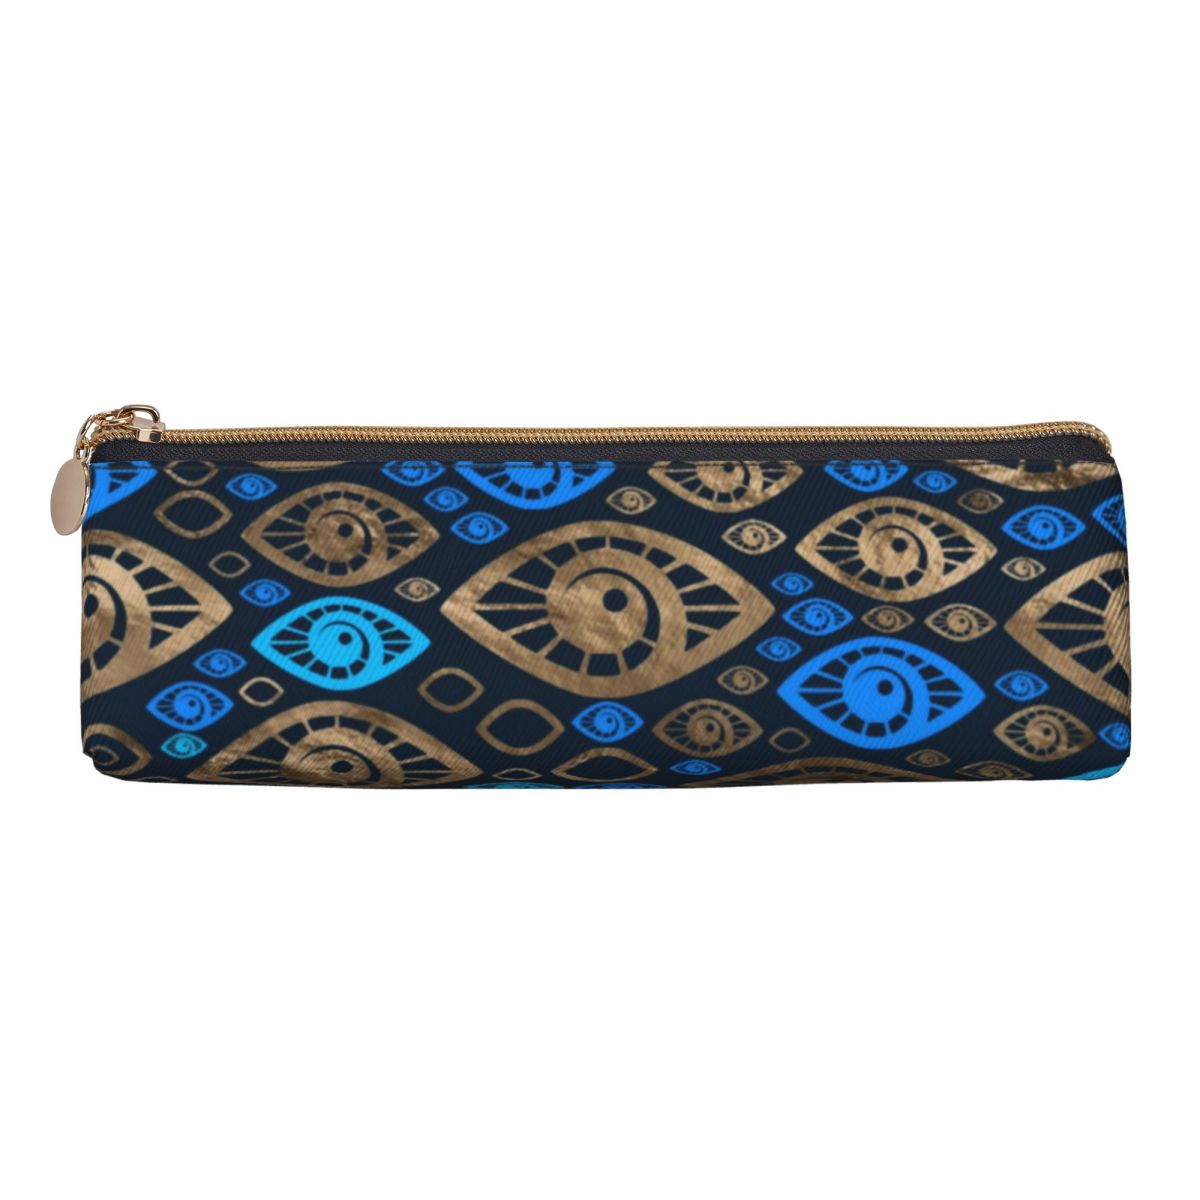 Eye Protection Amulet Design Pencil Case - Brown-Blue / One